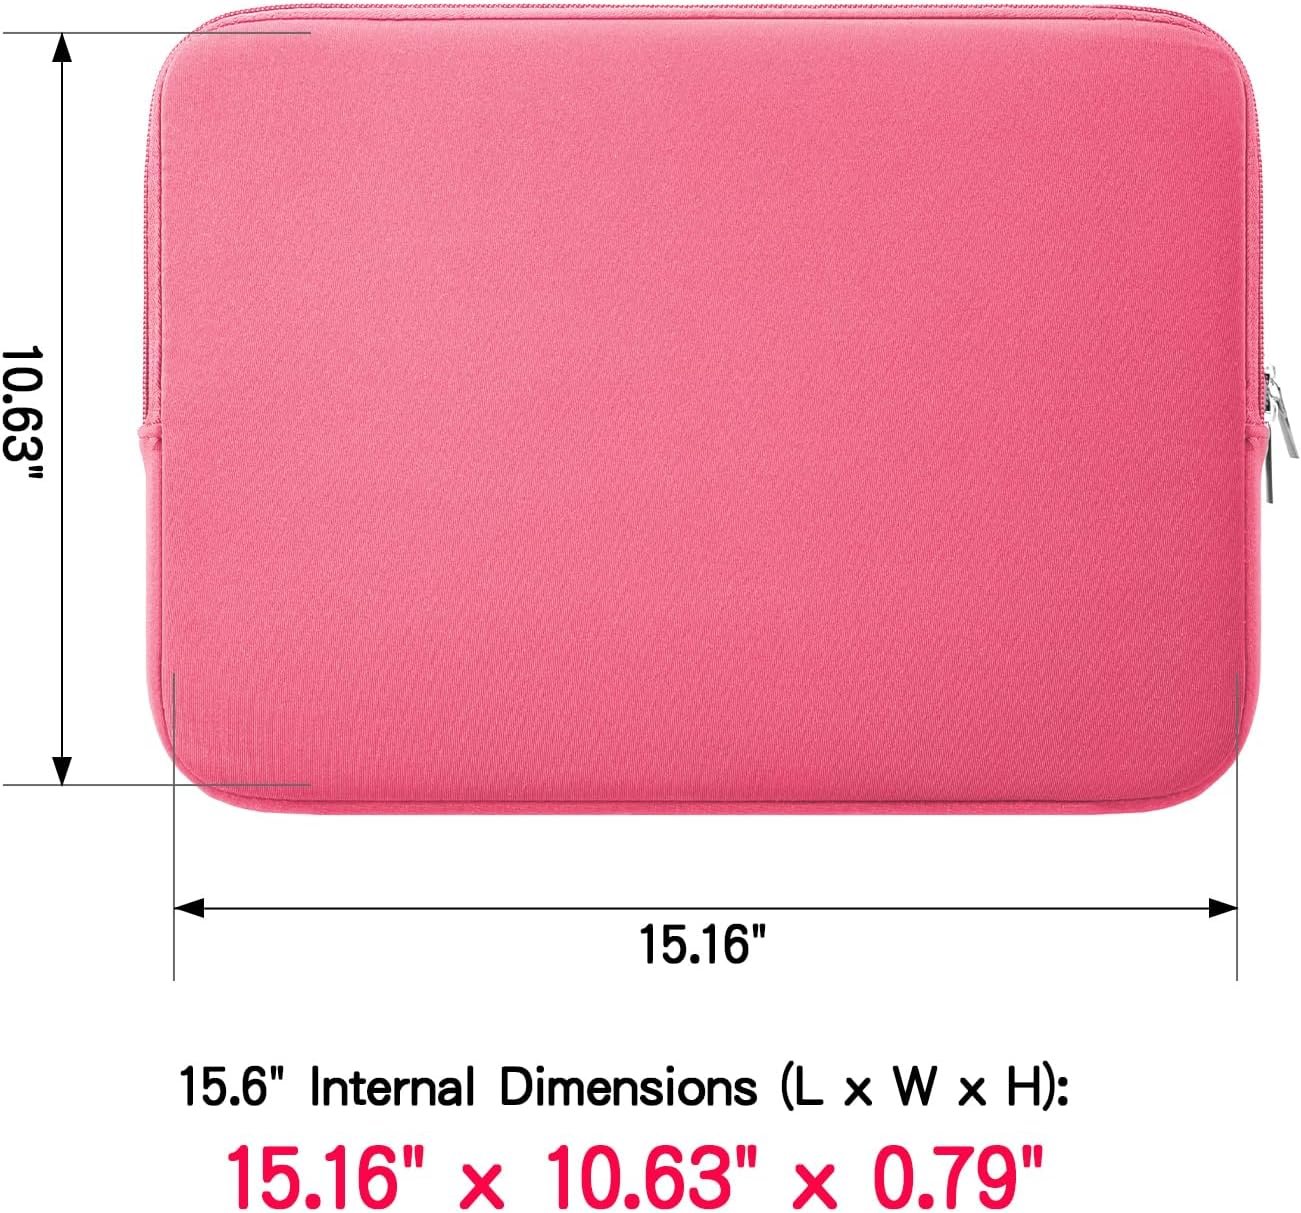 RAINYEAR Laptop Sleeve Case Review